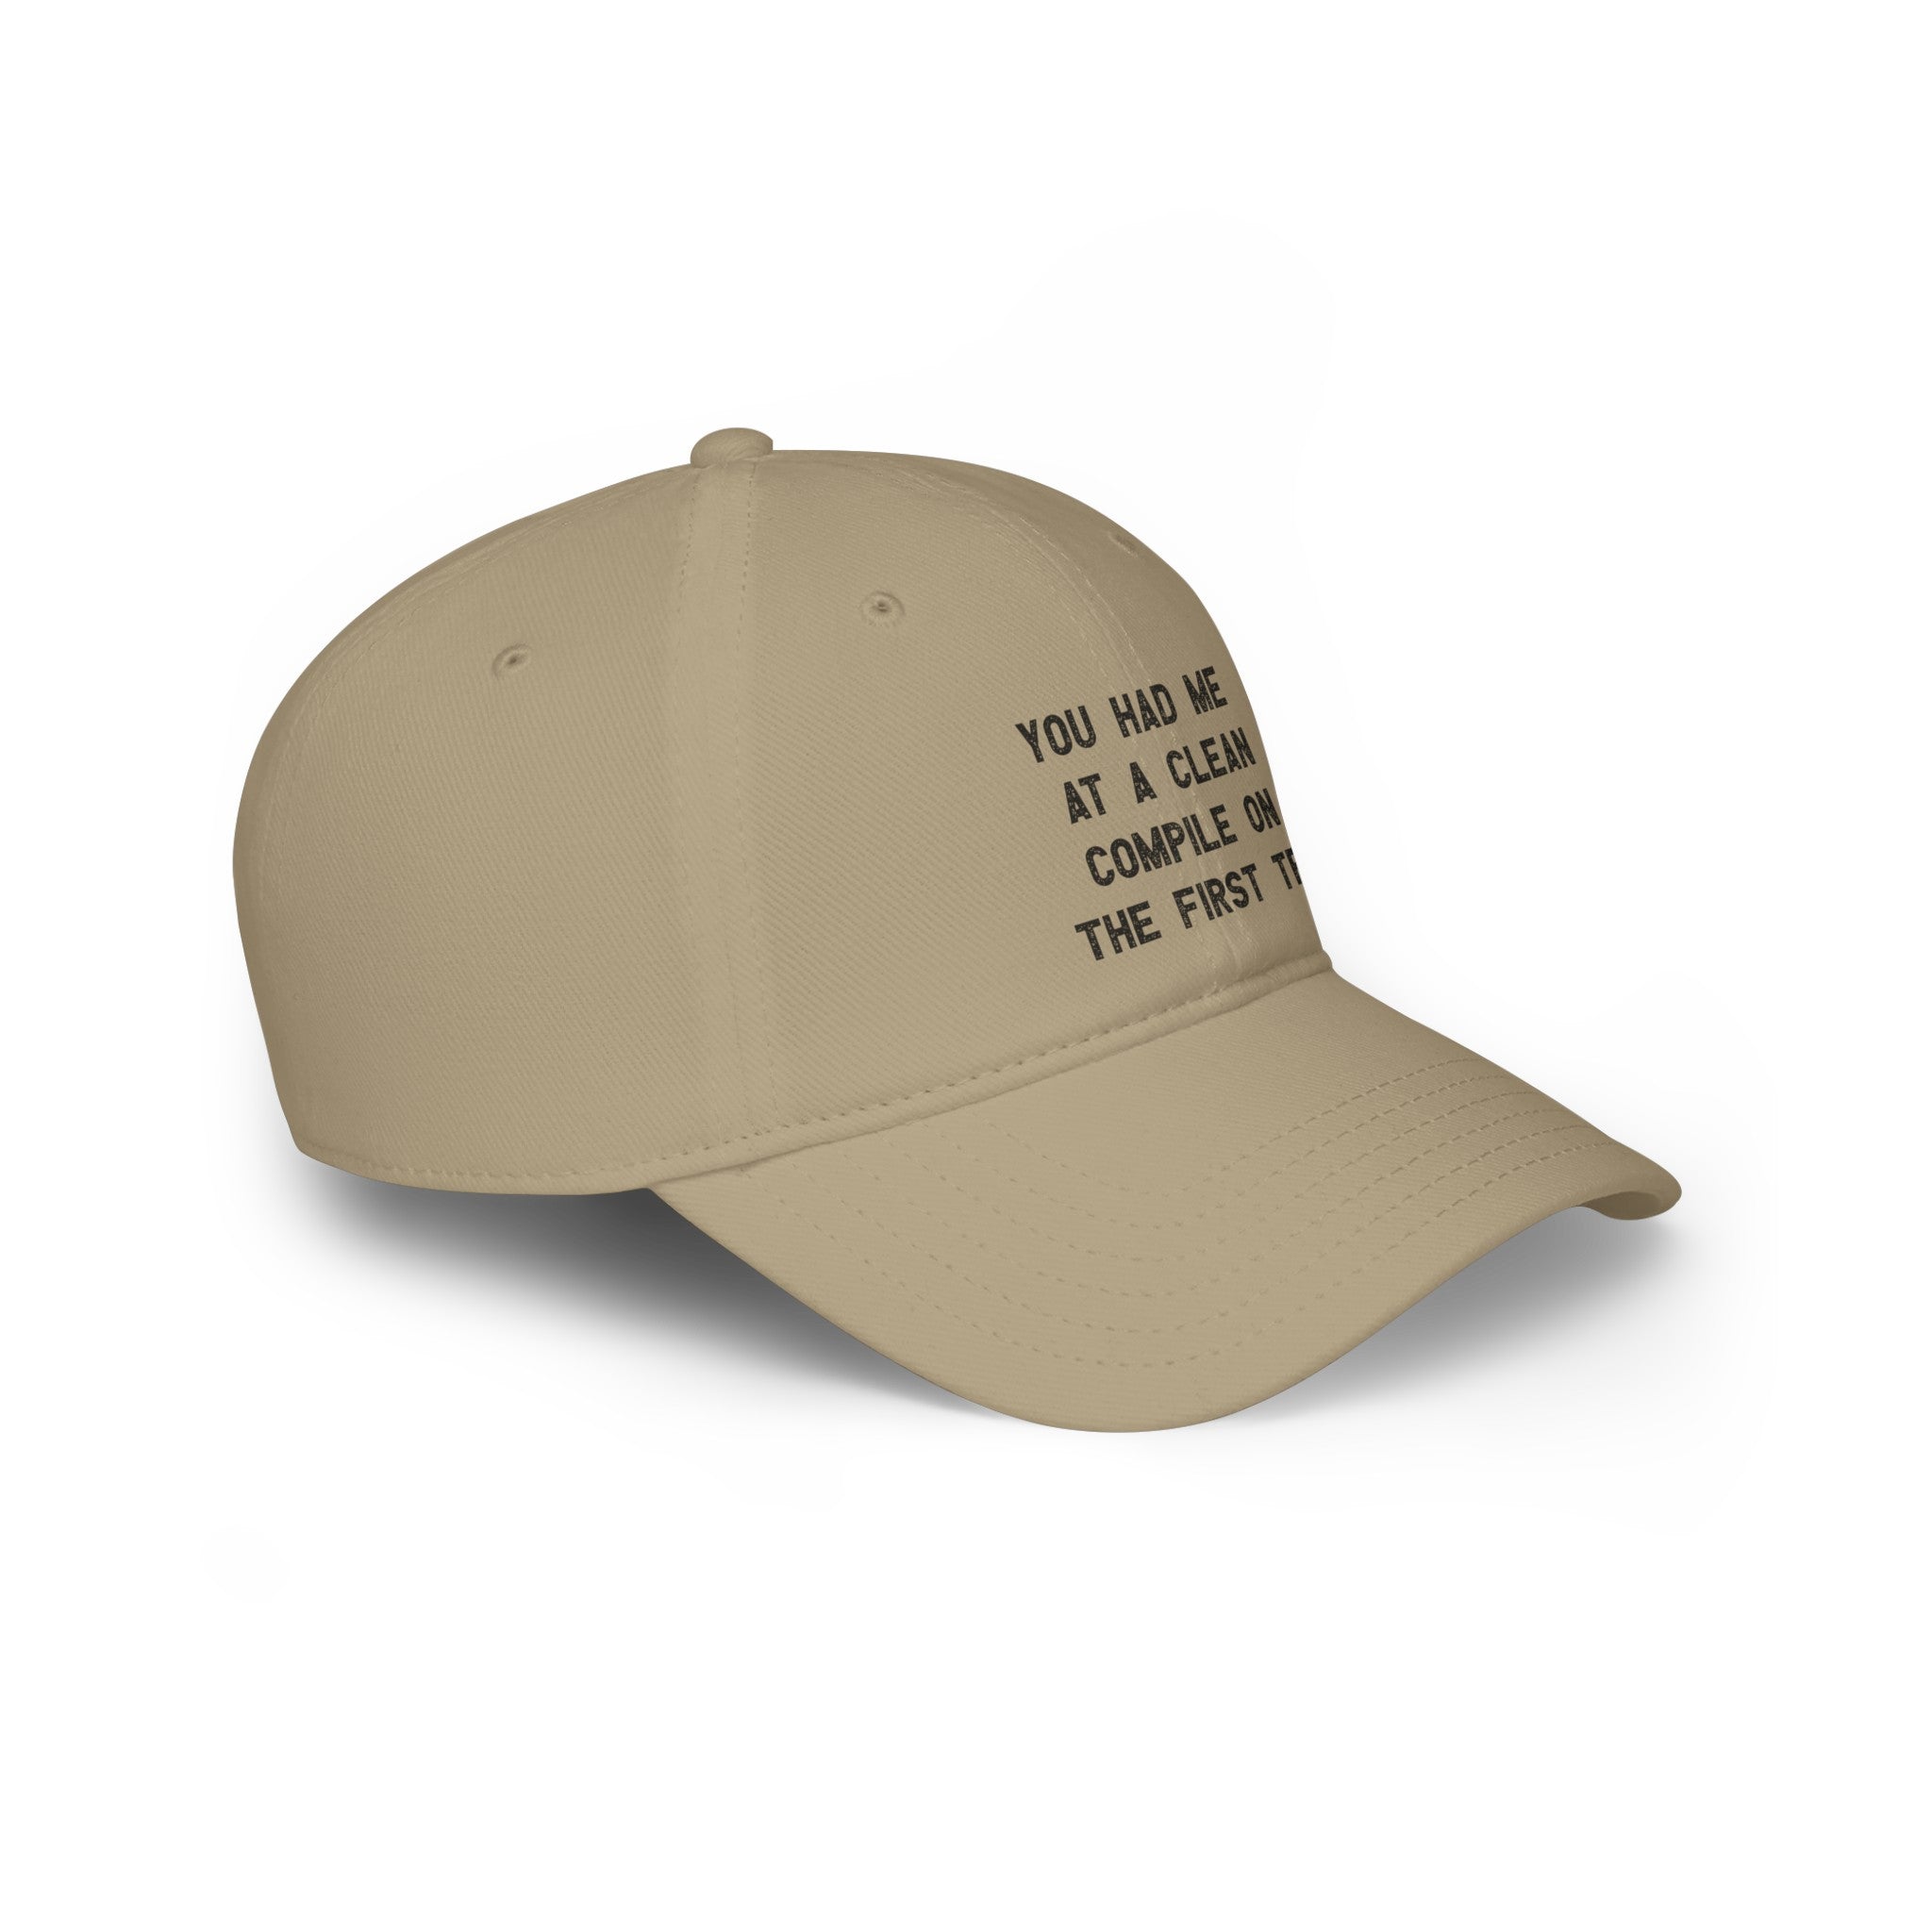 A beige baseball cap with black text reading, "You Had Me At a Clean Compile on the First Try," this "You Had Me At a Clean Compile on the First Try - Hat" boasts durable stitching for long-lasting wear.